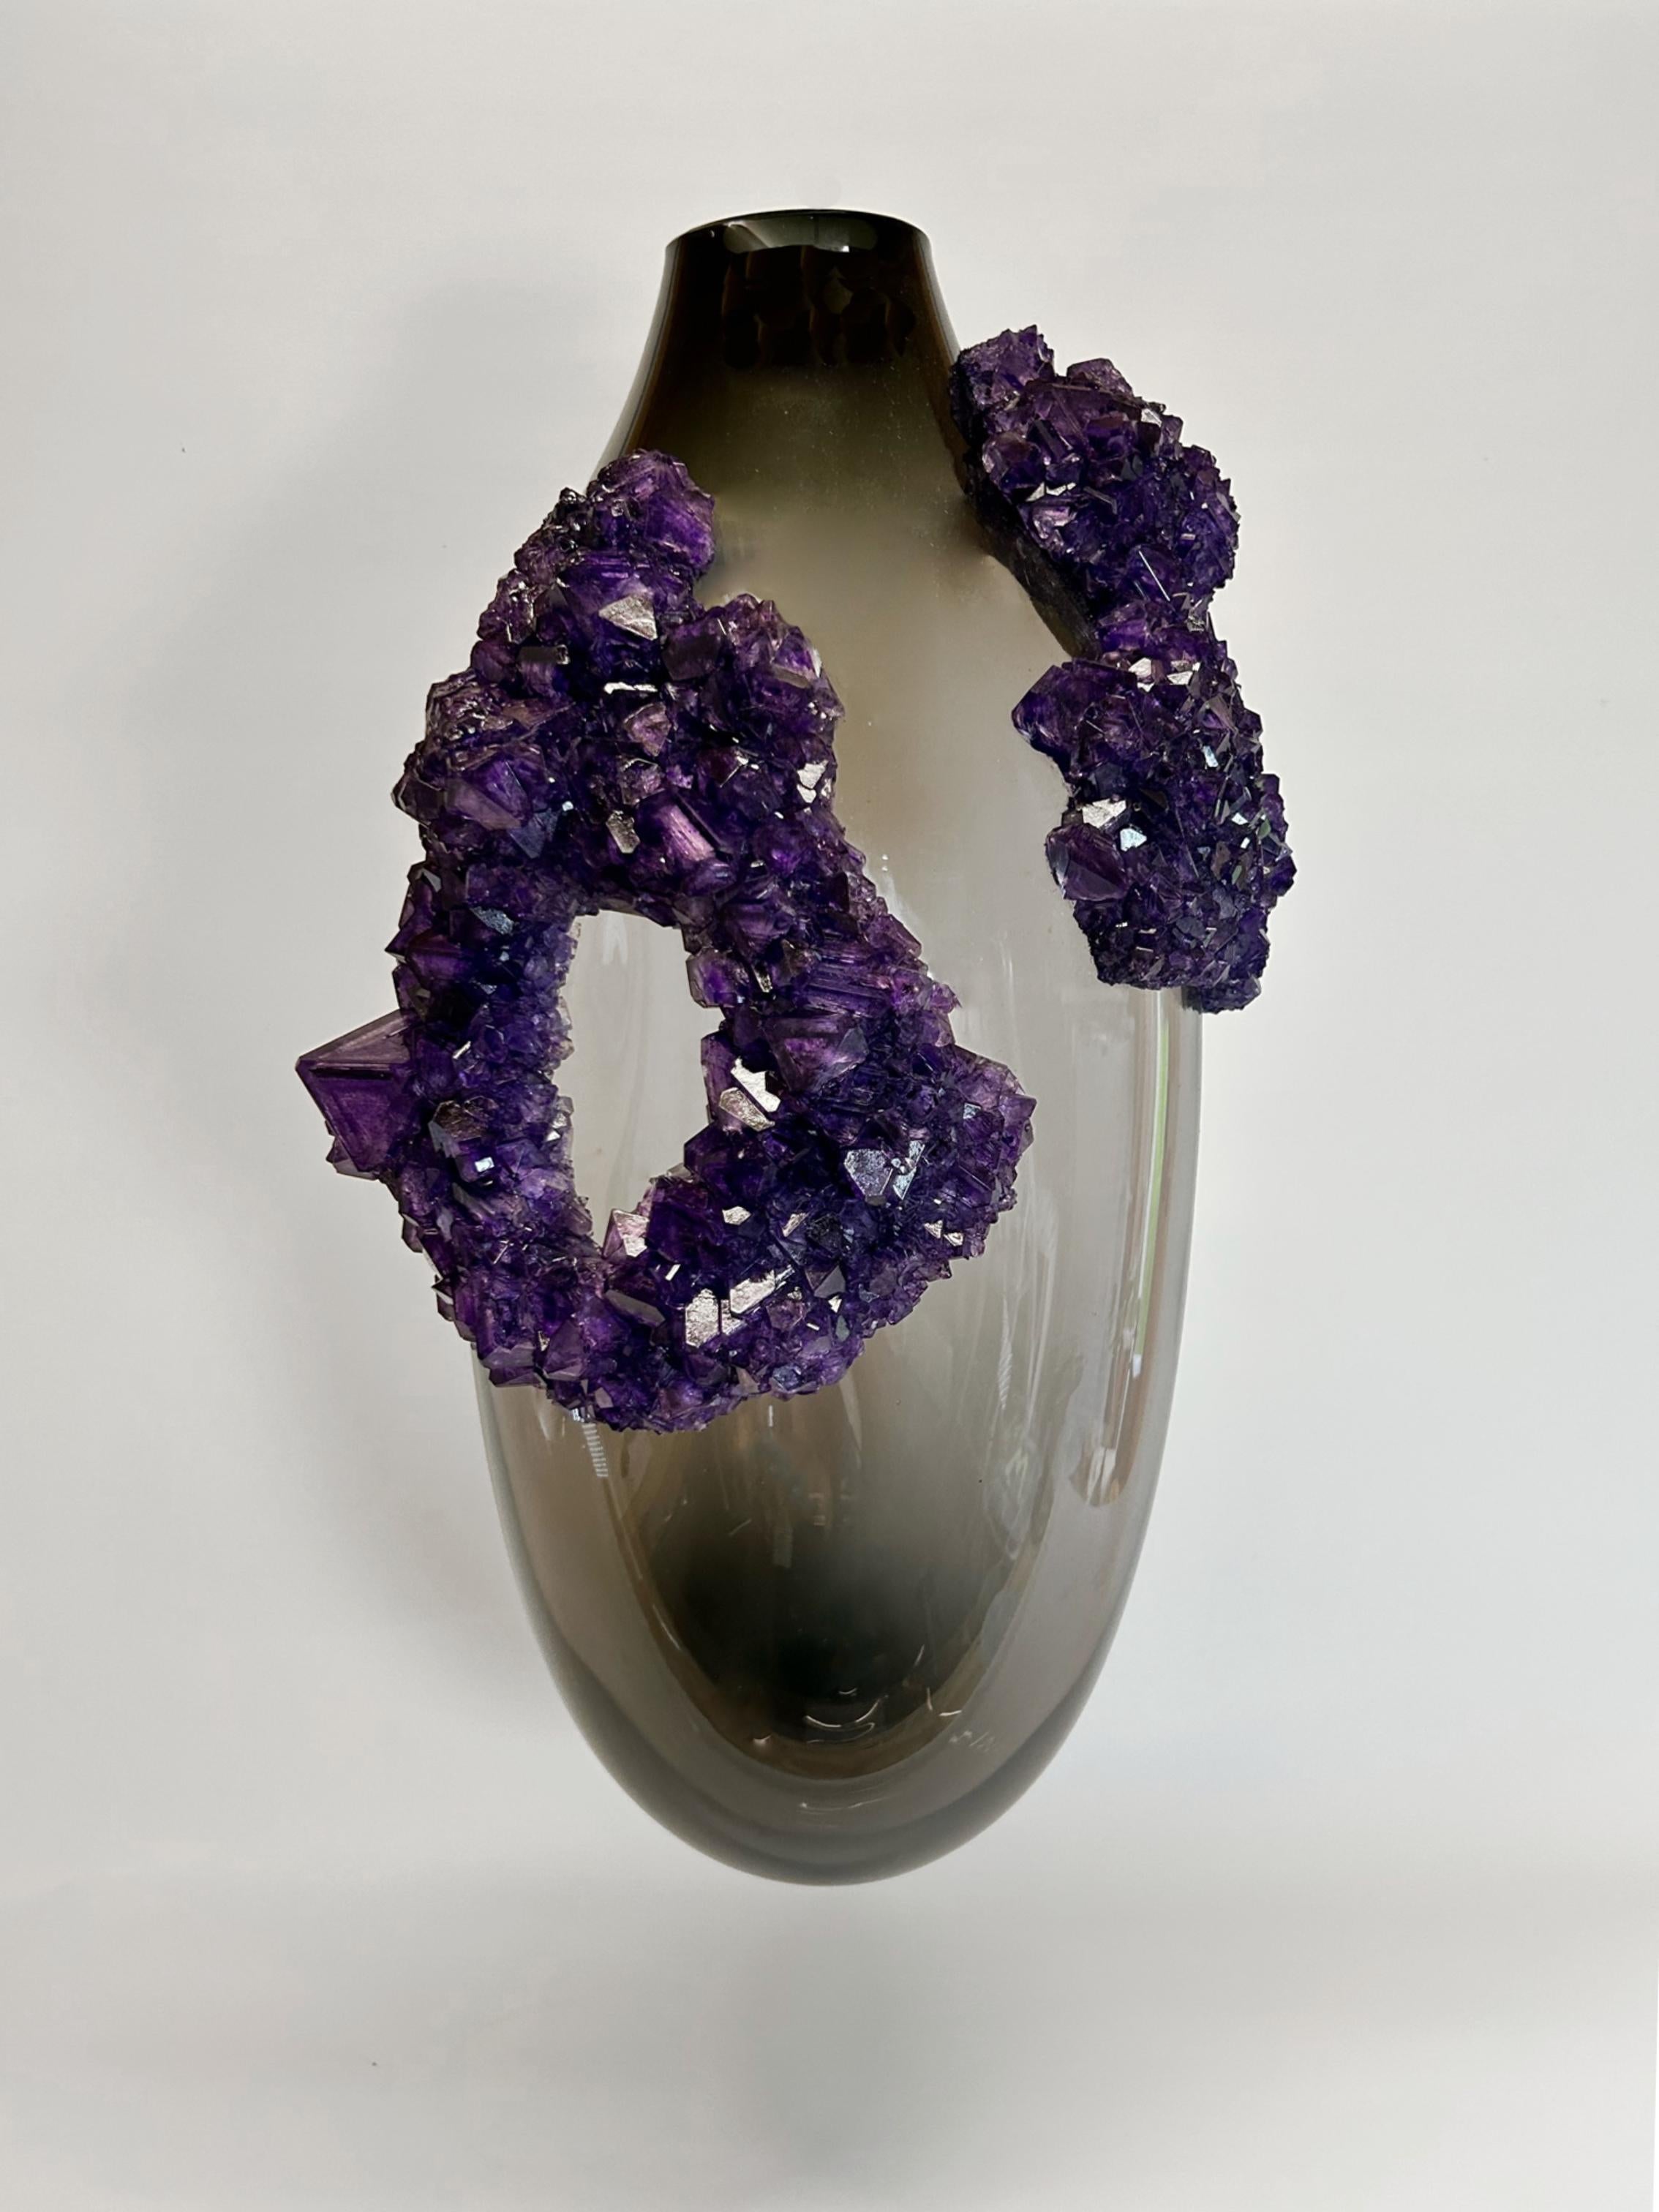 Emperors Breath Vessel 3 by Mark Sturkenboom
Dimensions: W 60 x D 25 x H 30 cm
Materials: Mouth Blown Glass, Overgrown Crystals


Mark Sturkenboom (Driebergen, 1983) is an artist that graduated with honors in 2012 at Artez Academy for the Arts in